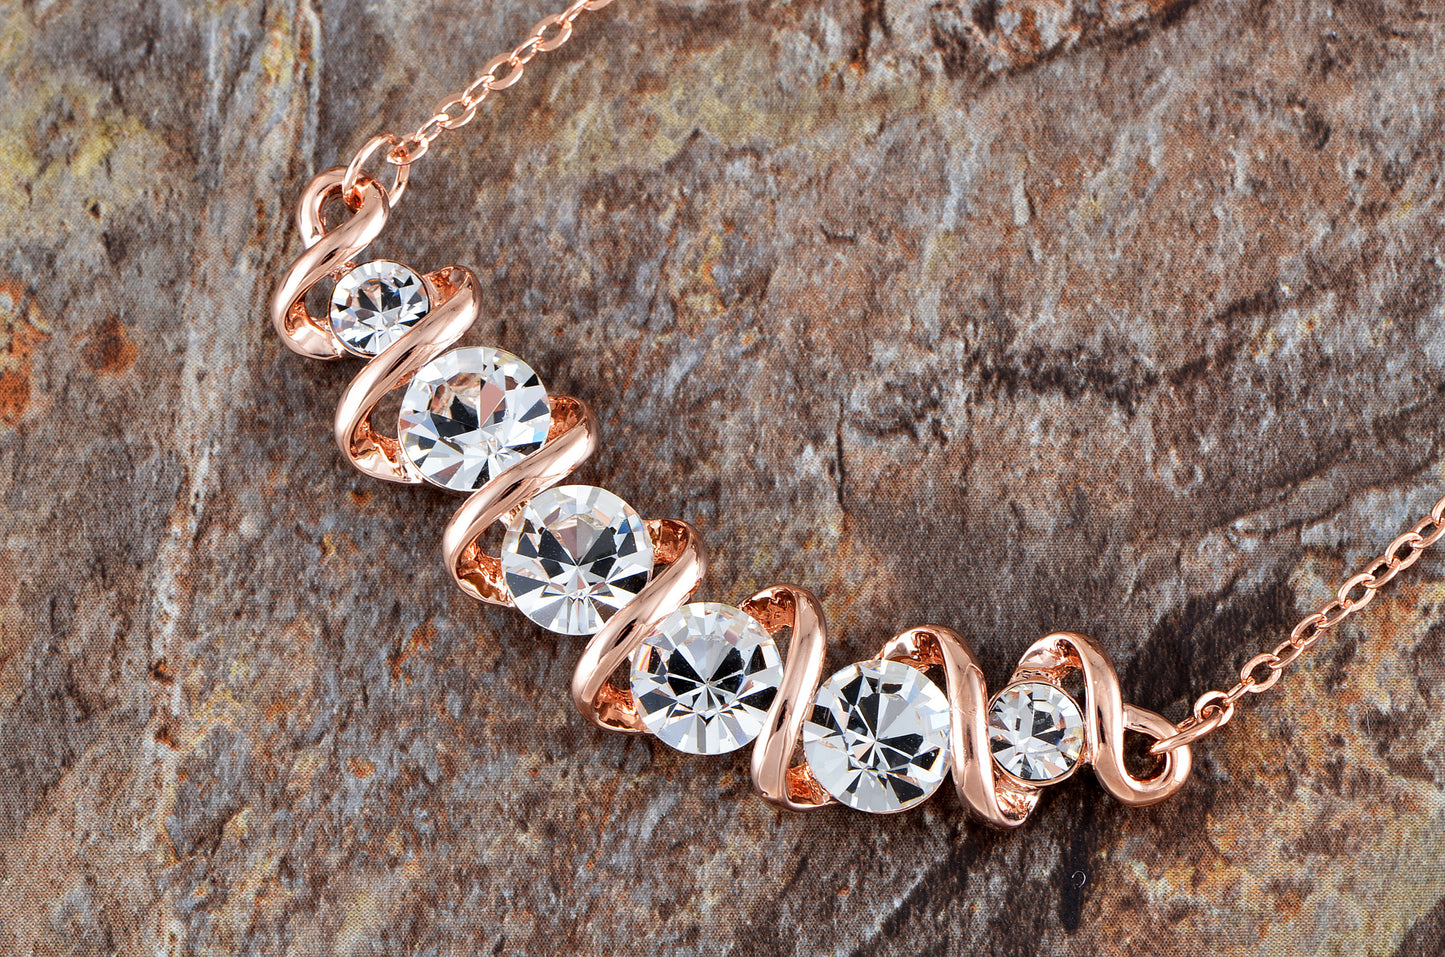 Swarovski Crystal Element Helix Swirl With Accents Necklace